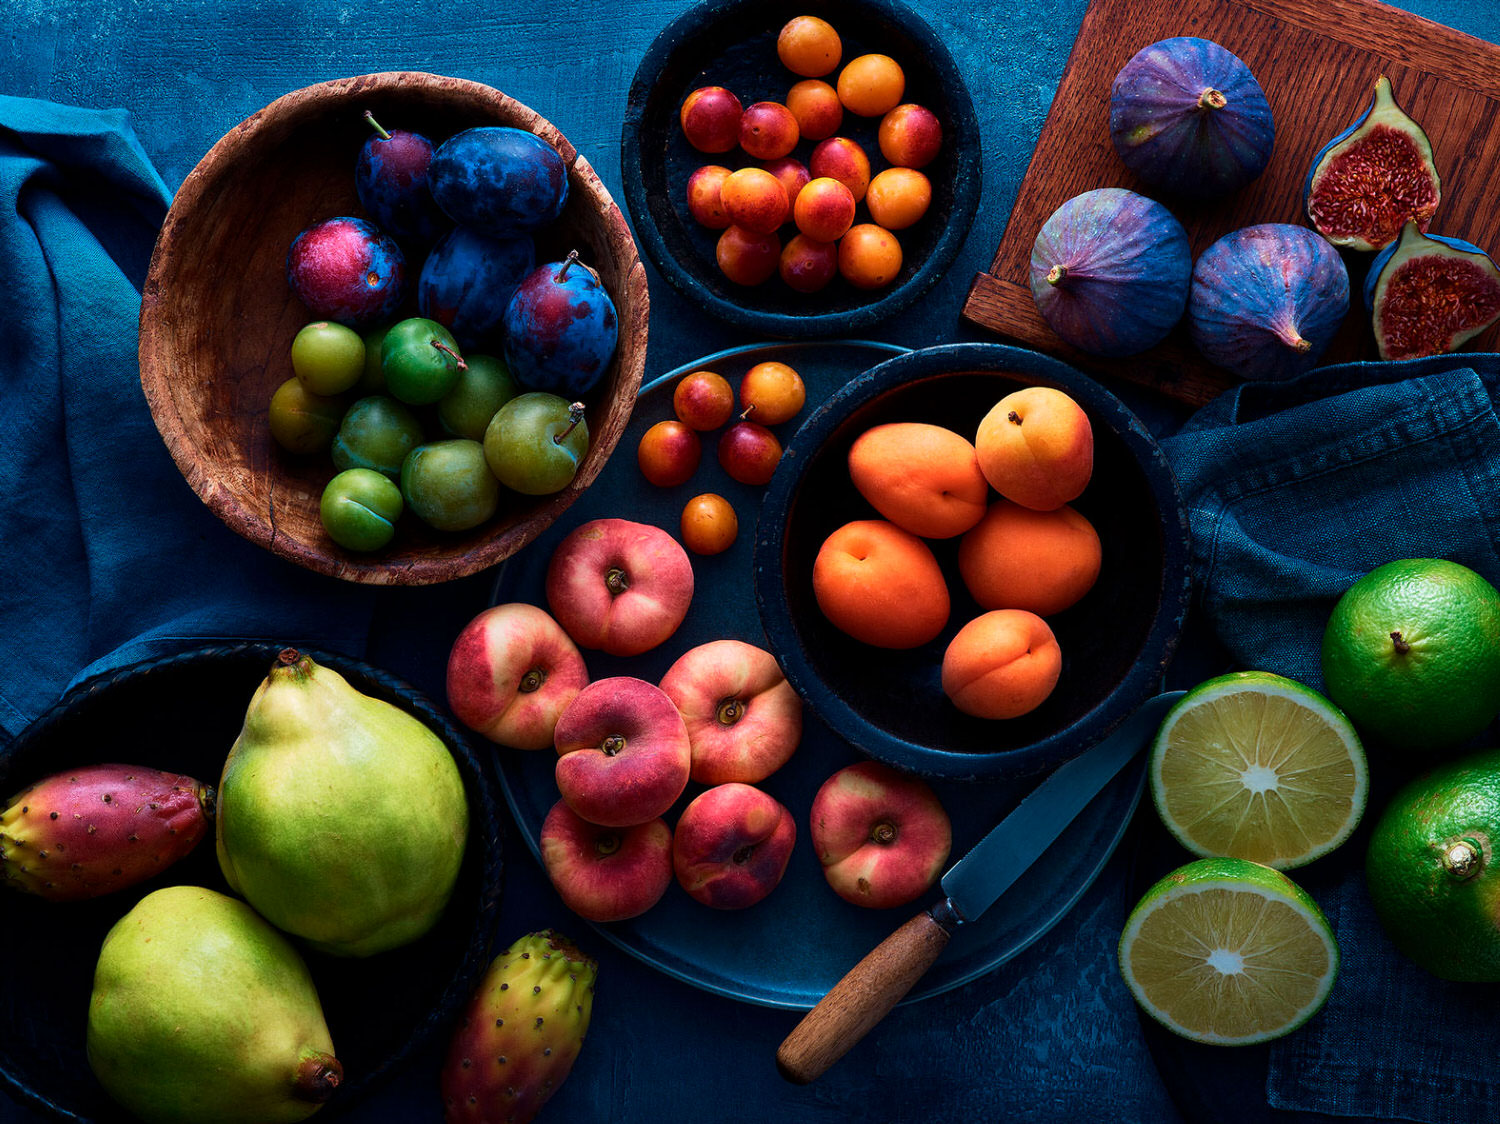 Finefood specialists fruit range on a blue backdrop and wooden boards